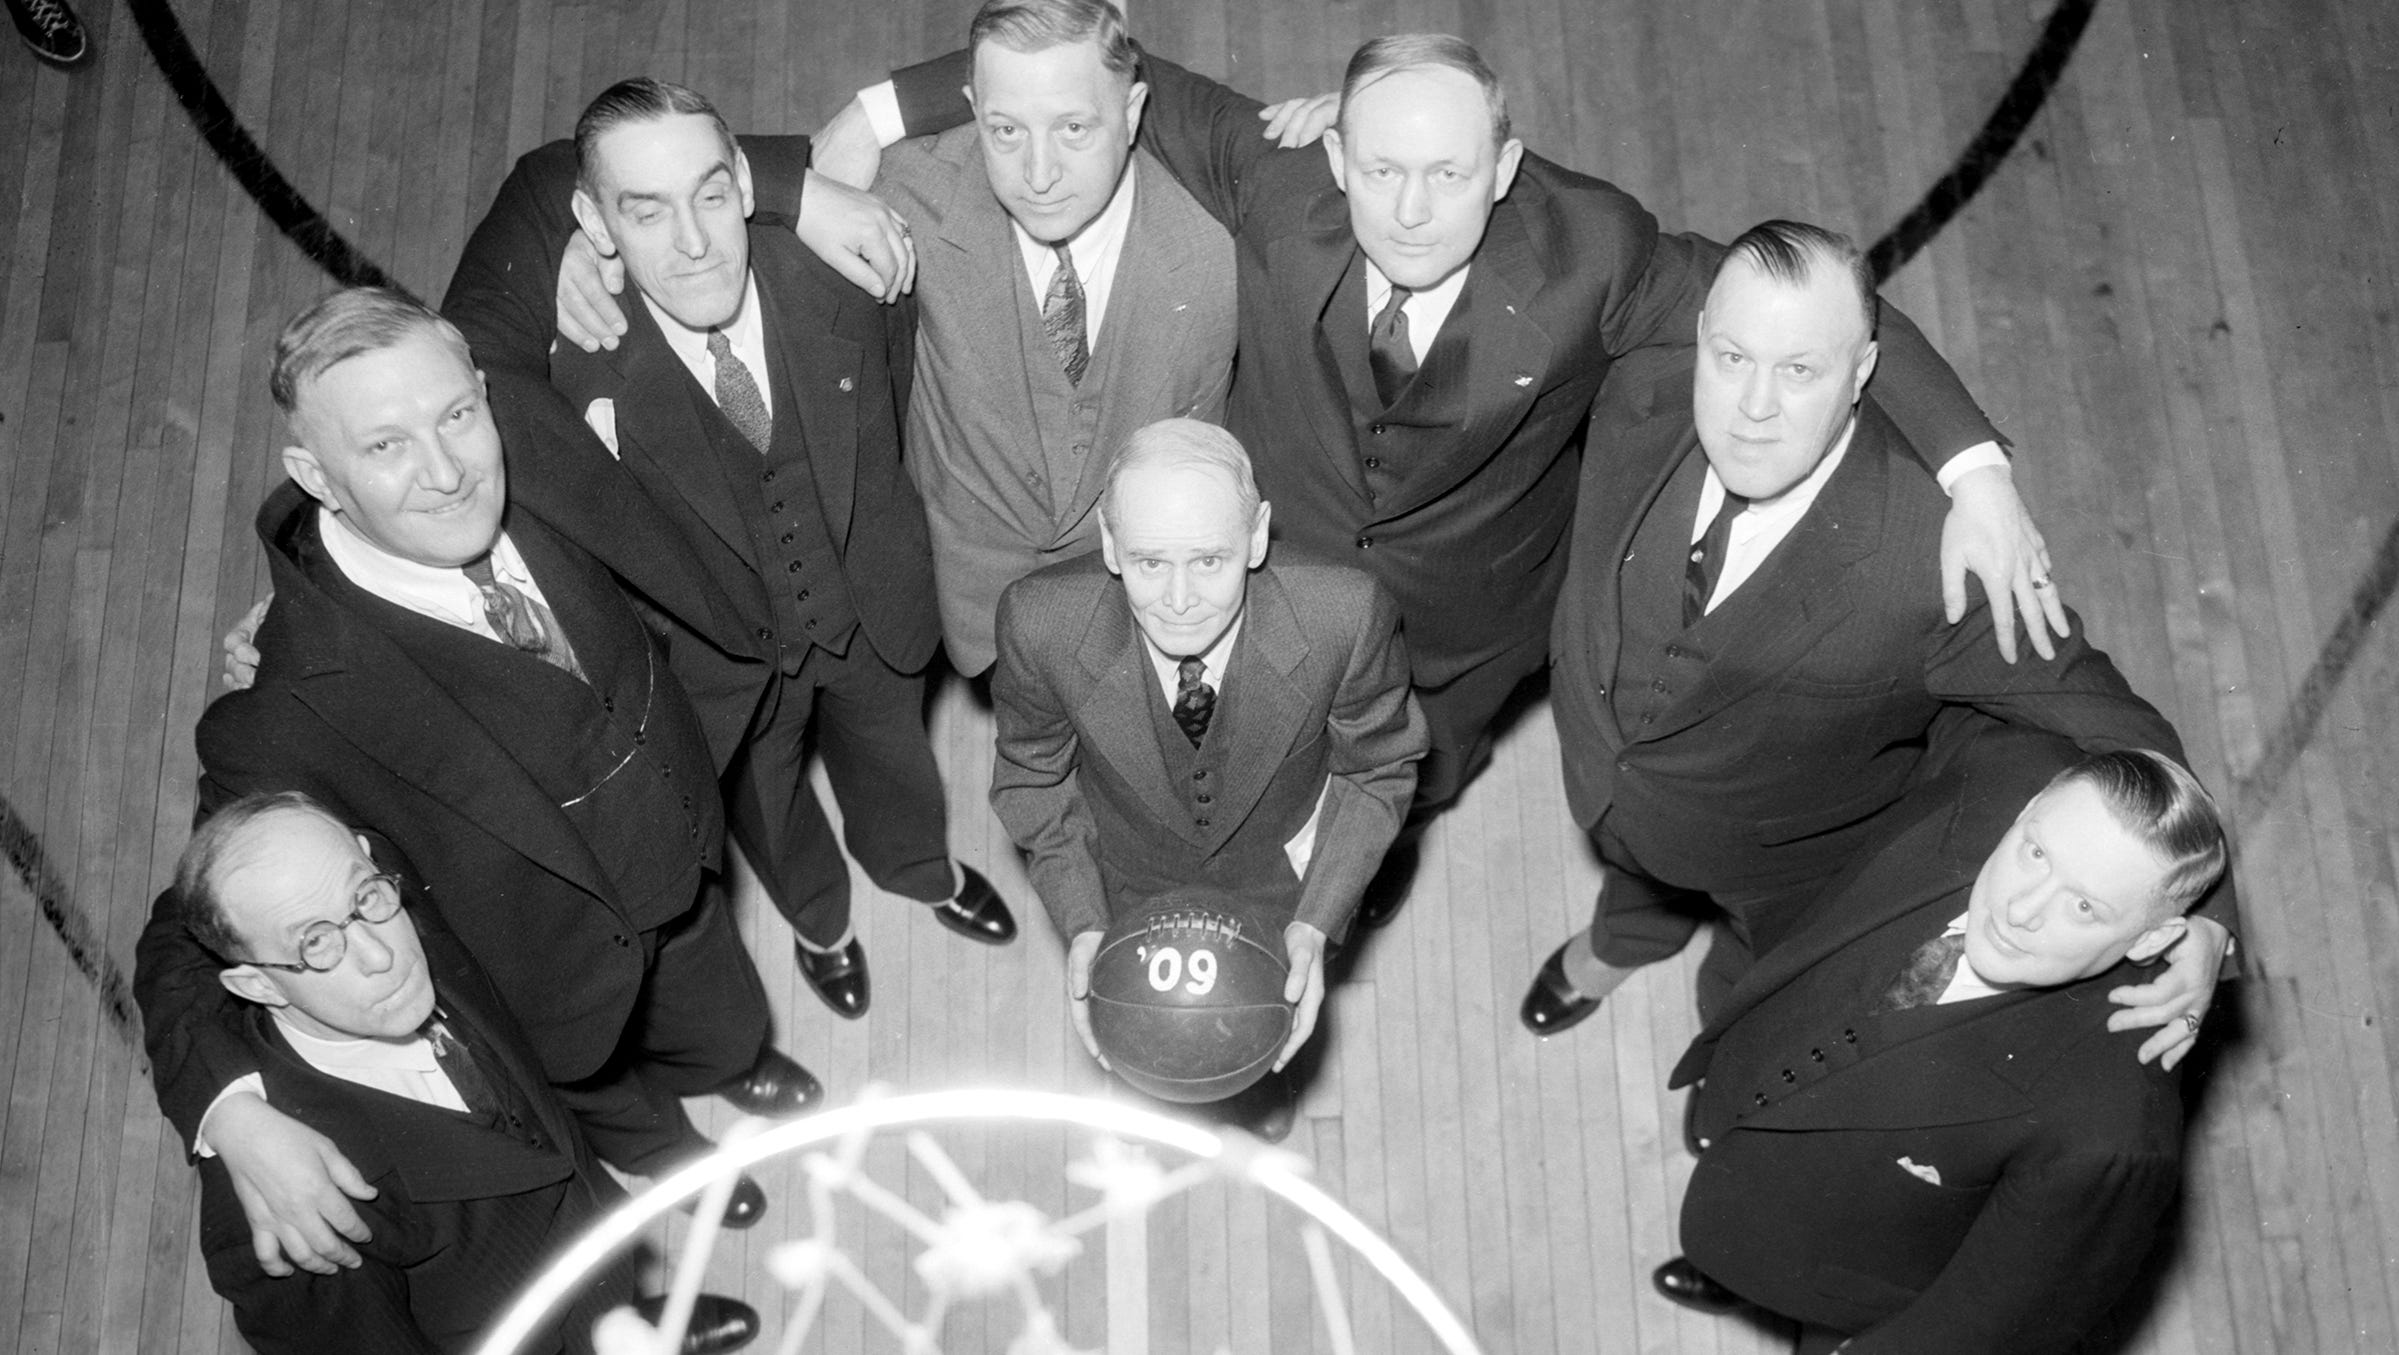 The most popular classes at the YMCA were targeted at businessmen. William N. Gray holds the ball for a Detroit YMCA basketball team in 1909.  From left: Dr. George Hanna, Bernard Johnson, Roy Boosey, Chan Johnson, Gailey Stockham, Al G. Huebner and Ernie Wilson.